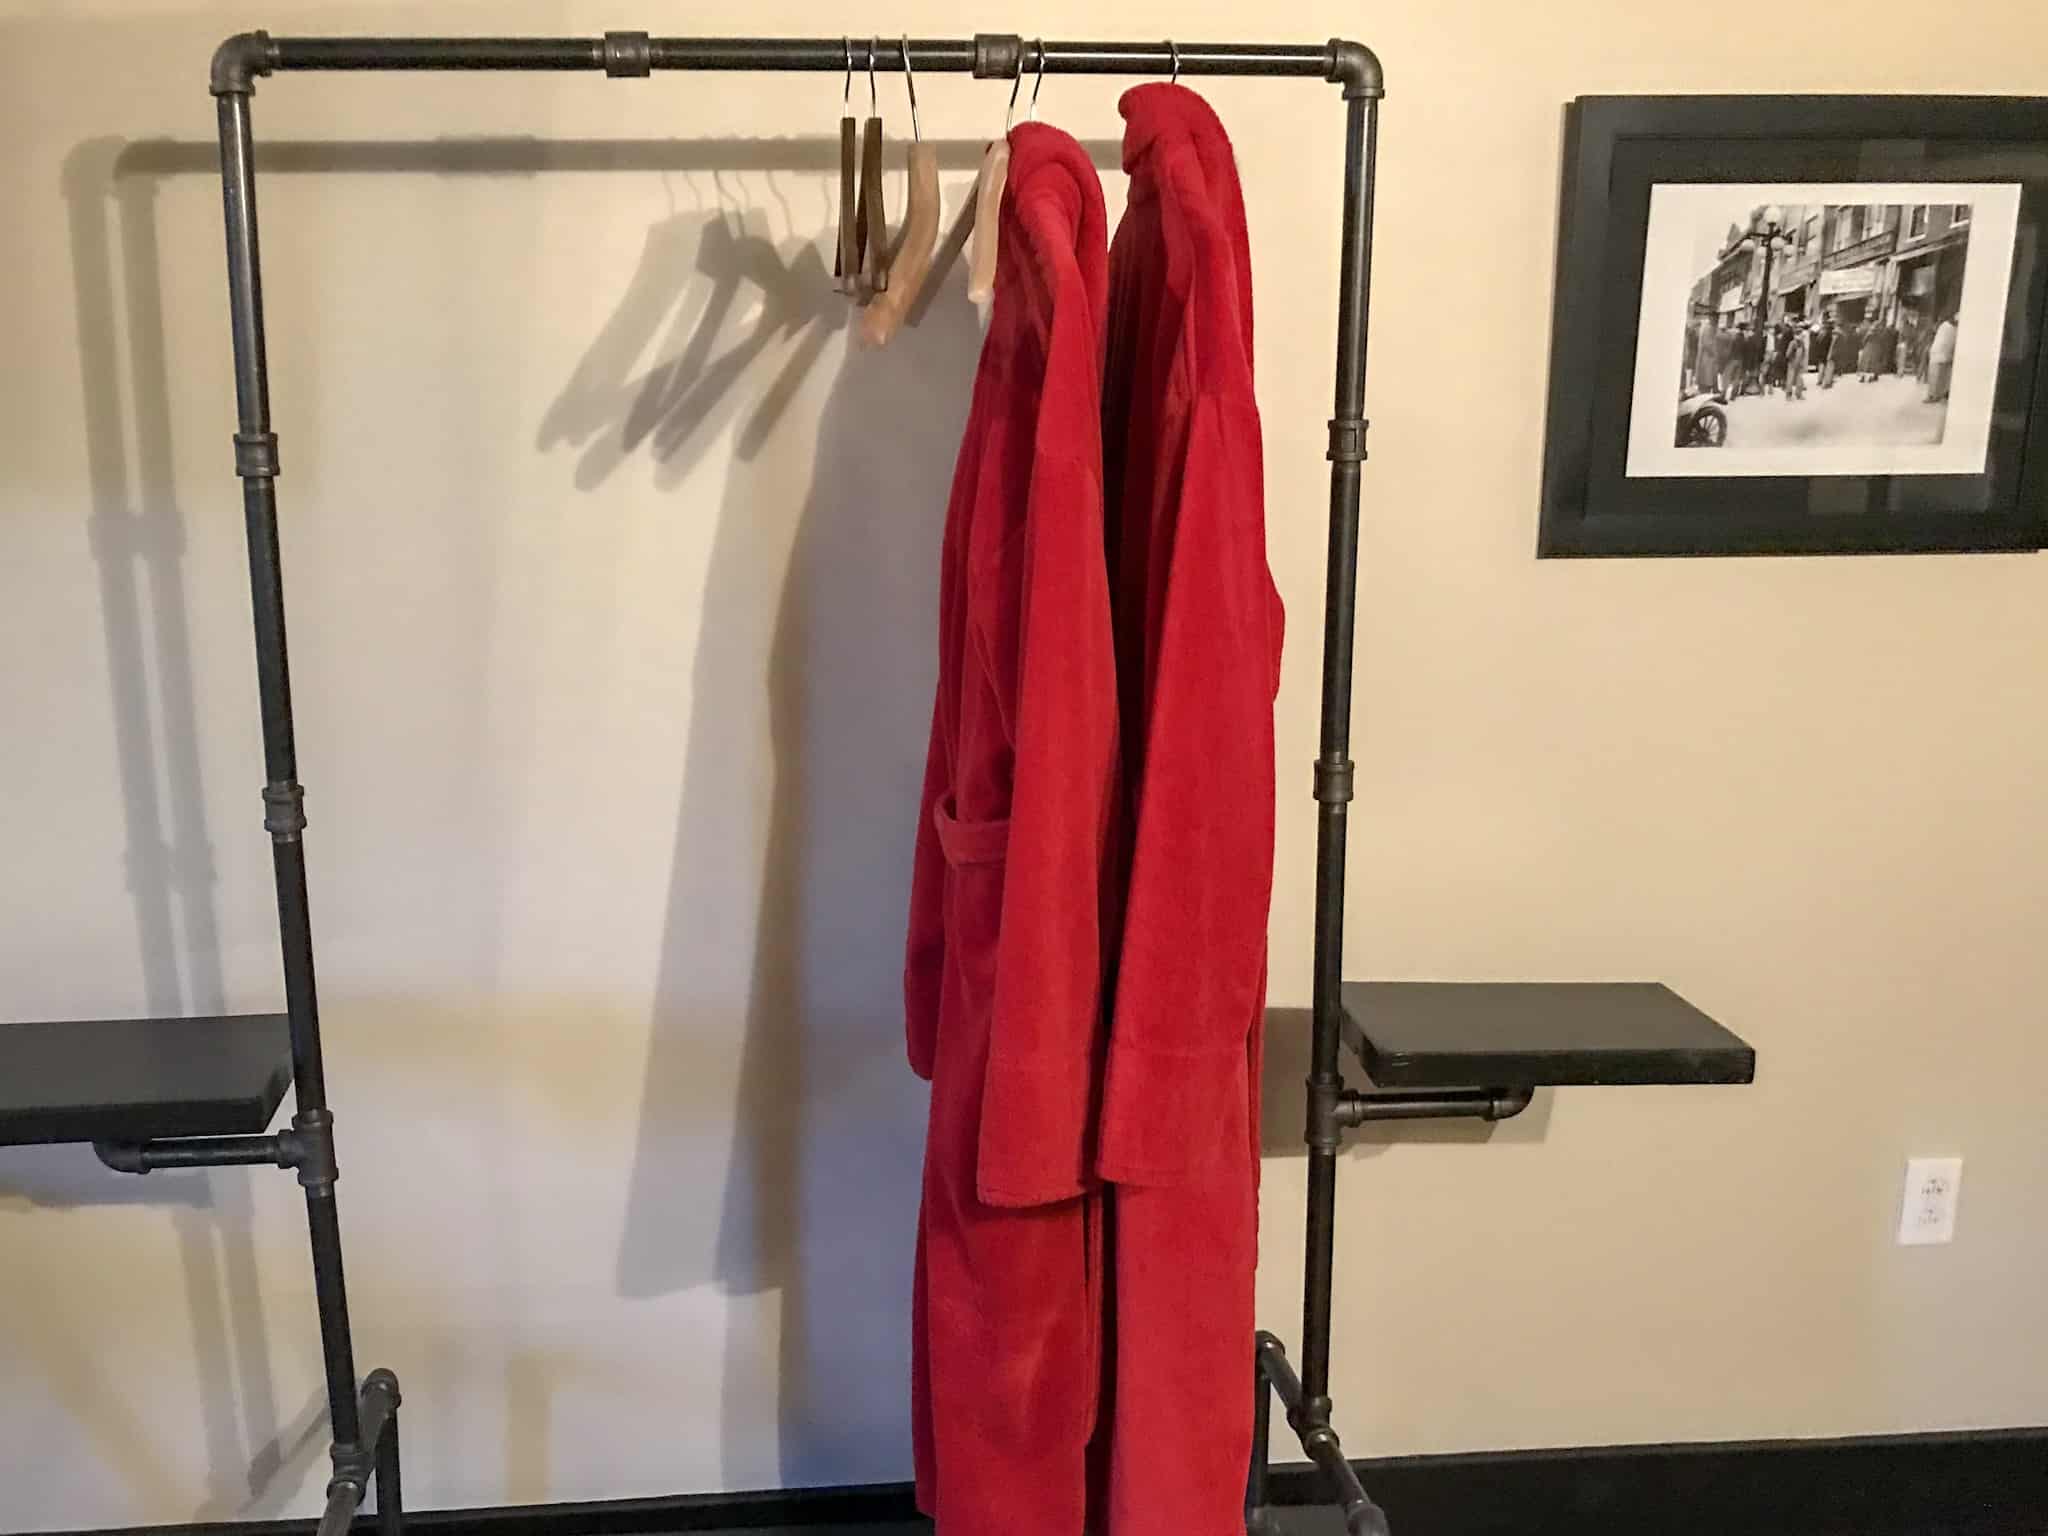 Thick, thirsty robes are always a nice luxury touch! And the Gunrunner is definitely a great spot for a luxury Alabama getaway!